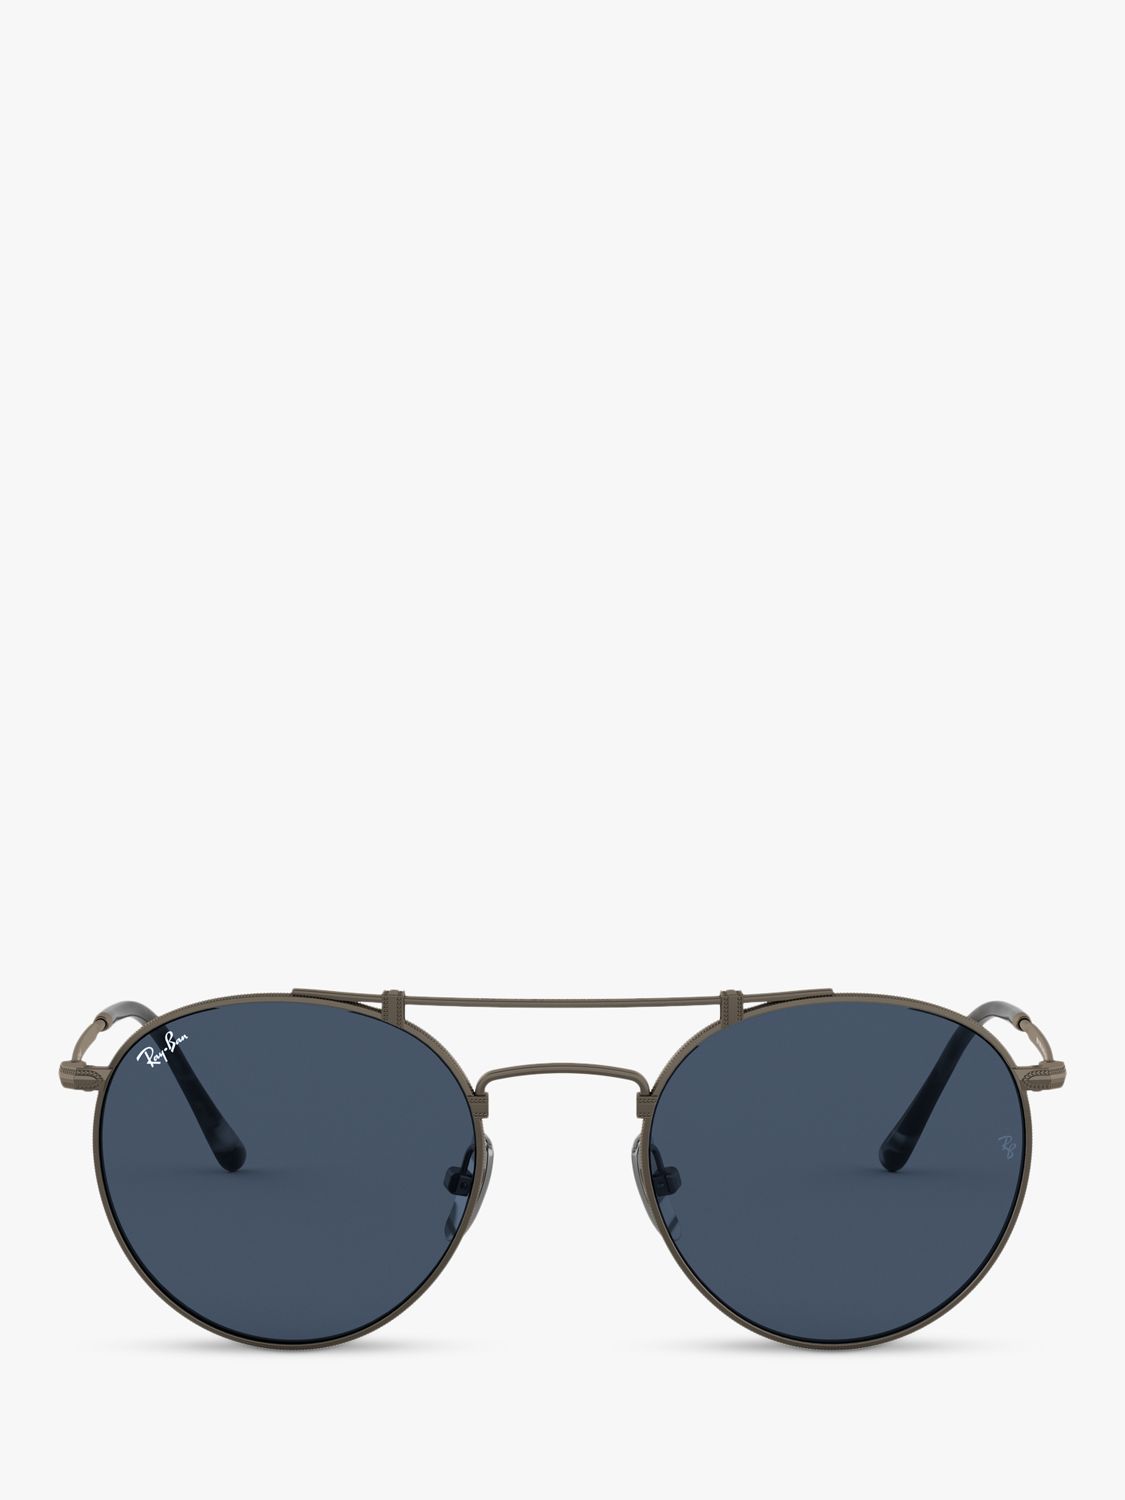 Buy Ray-Ban RB8147 Unisex Oval Sunglasses, Demi Gloss Pewter/Dark Blue Online at johnlewis.com